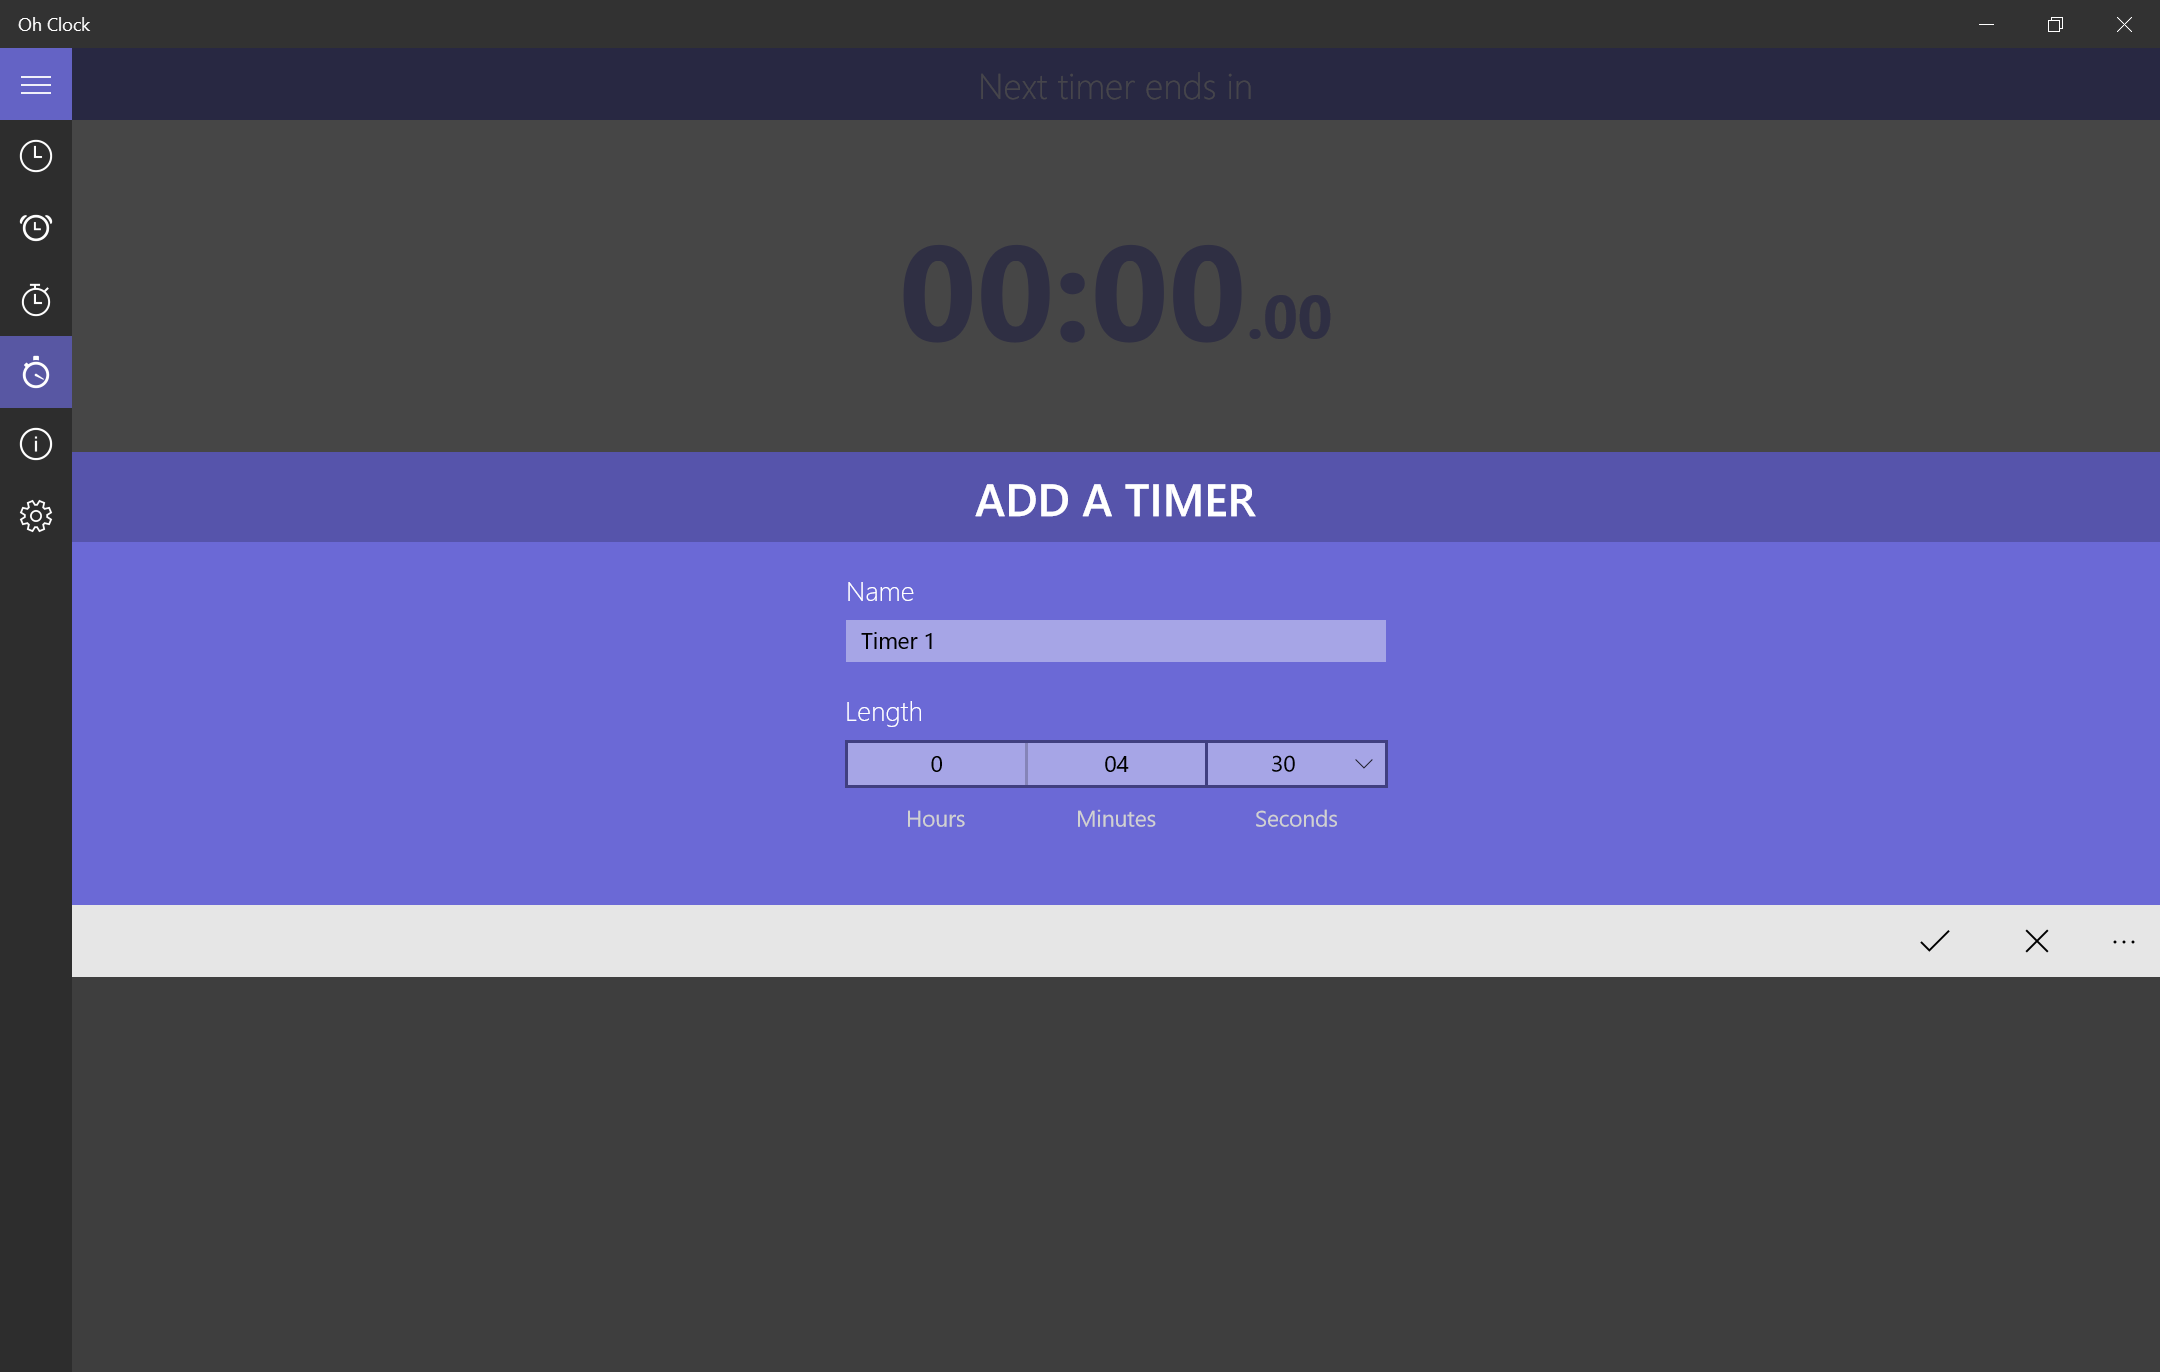 A simple and clean way to add a new timer to your list